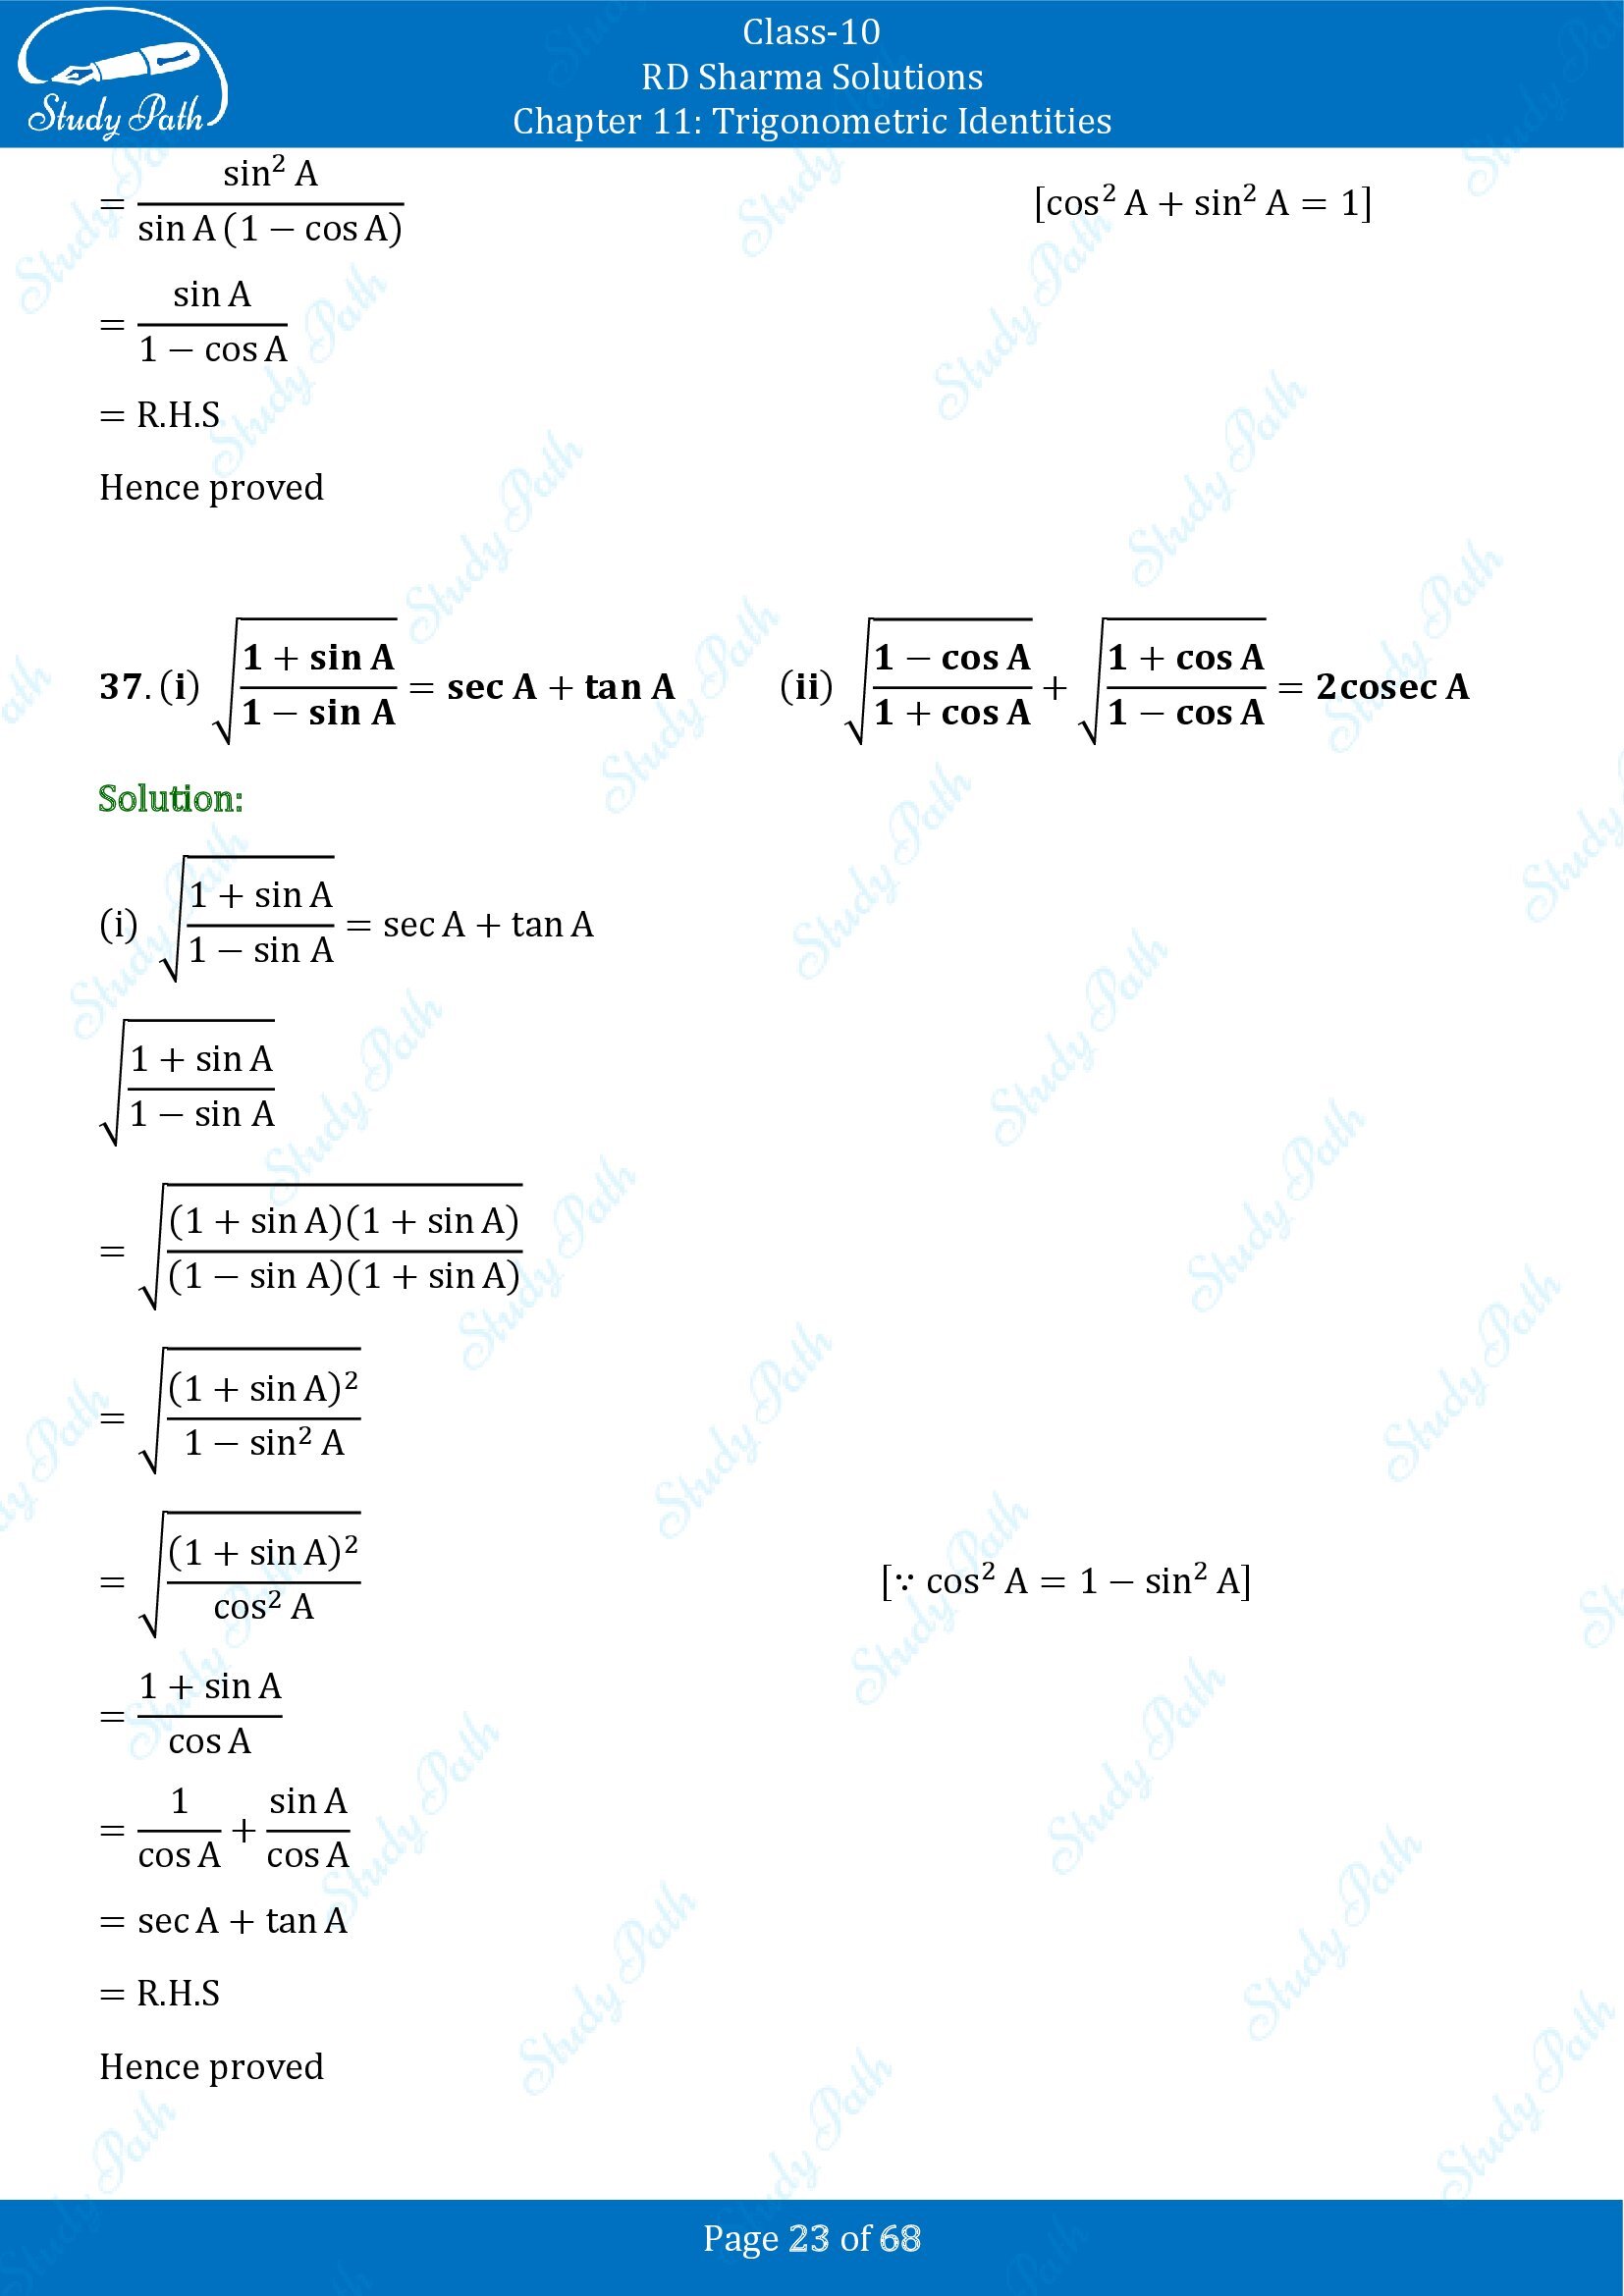 RD Sharma Solutions Class 10 Chapter 11 Trigonometric Identities Exercise 11.1 00023